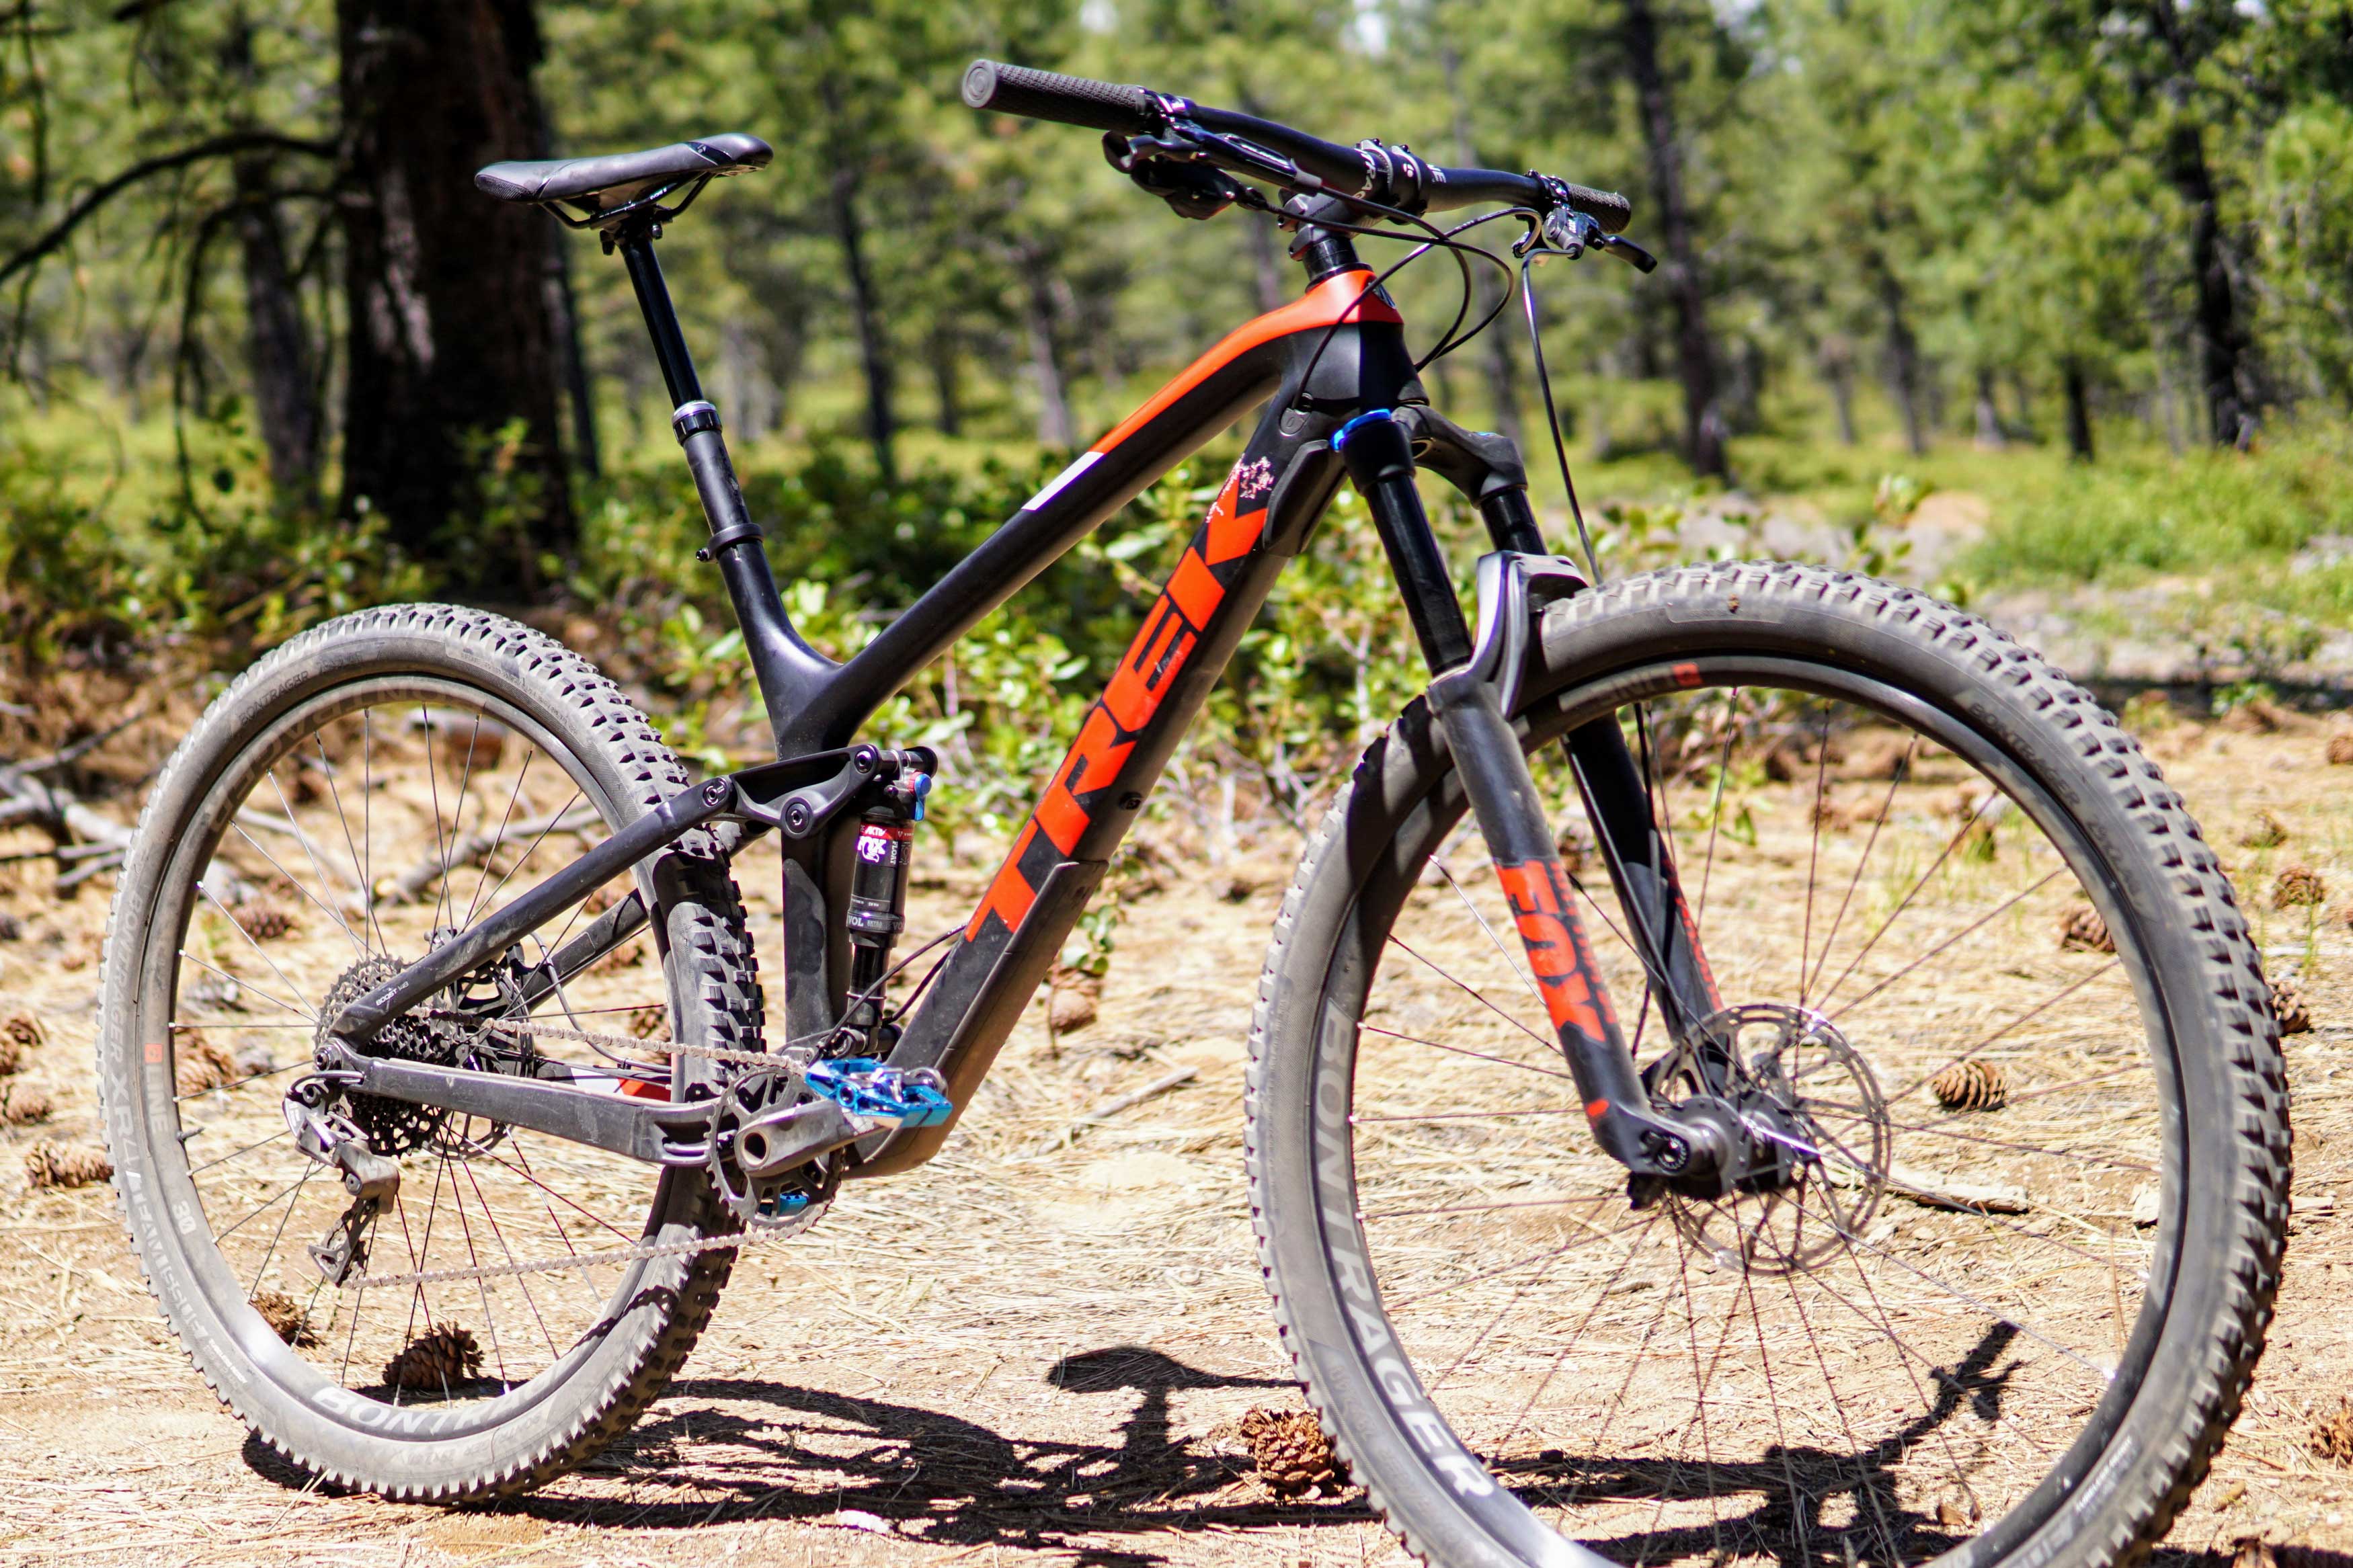 offset verrassing Klaar The Fuel EX 9.7 is a standout highlight in our budget bike roundup